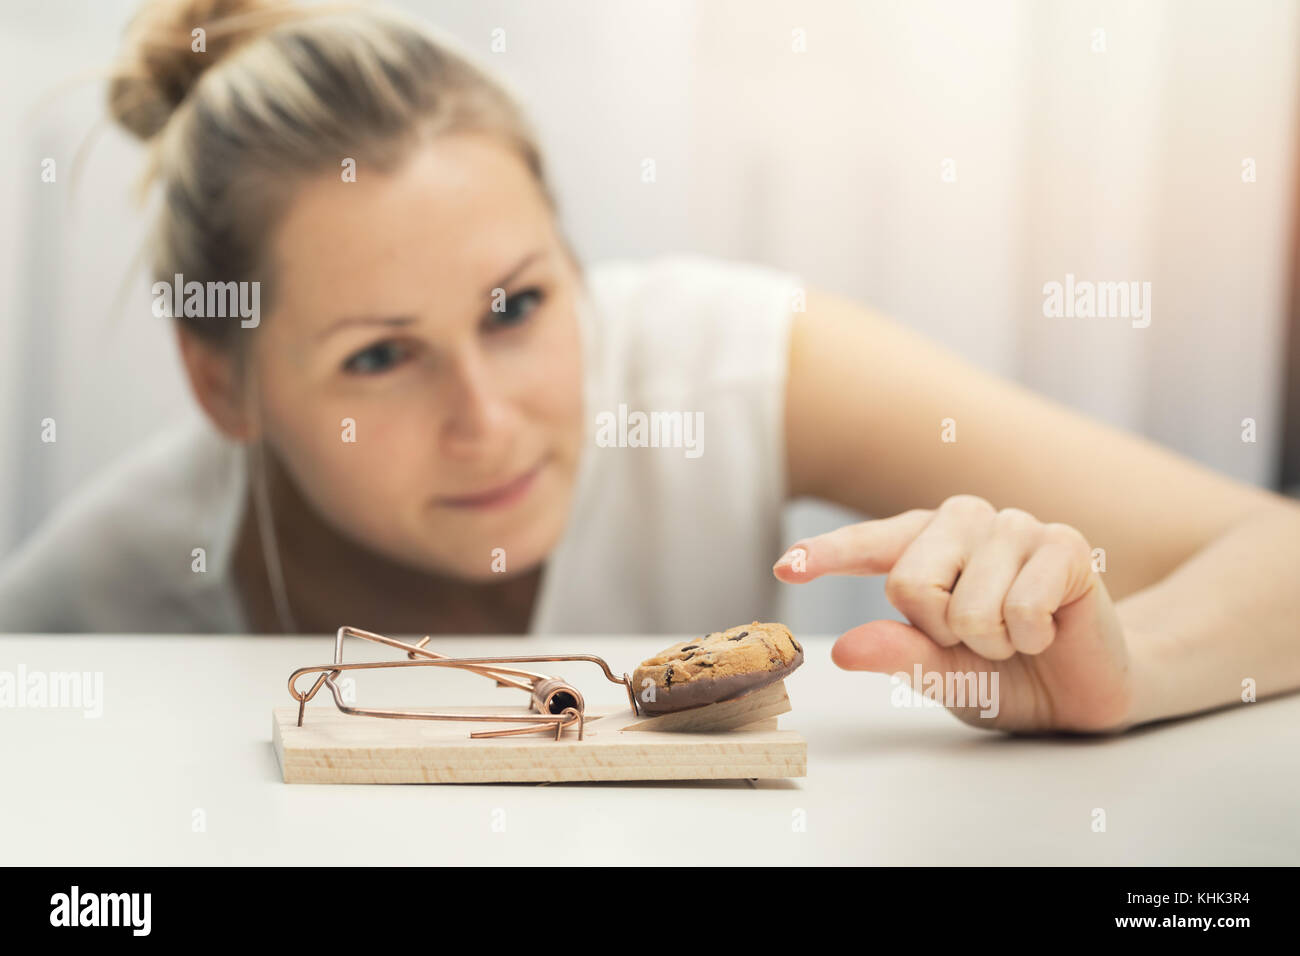 hungry woman trying to steal cookie from mouse trap. weight loss diet plan concept Stock Photo